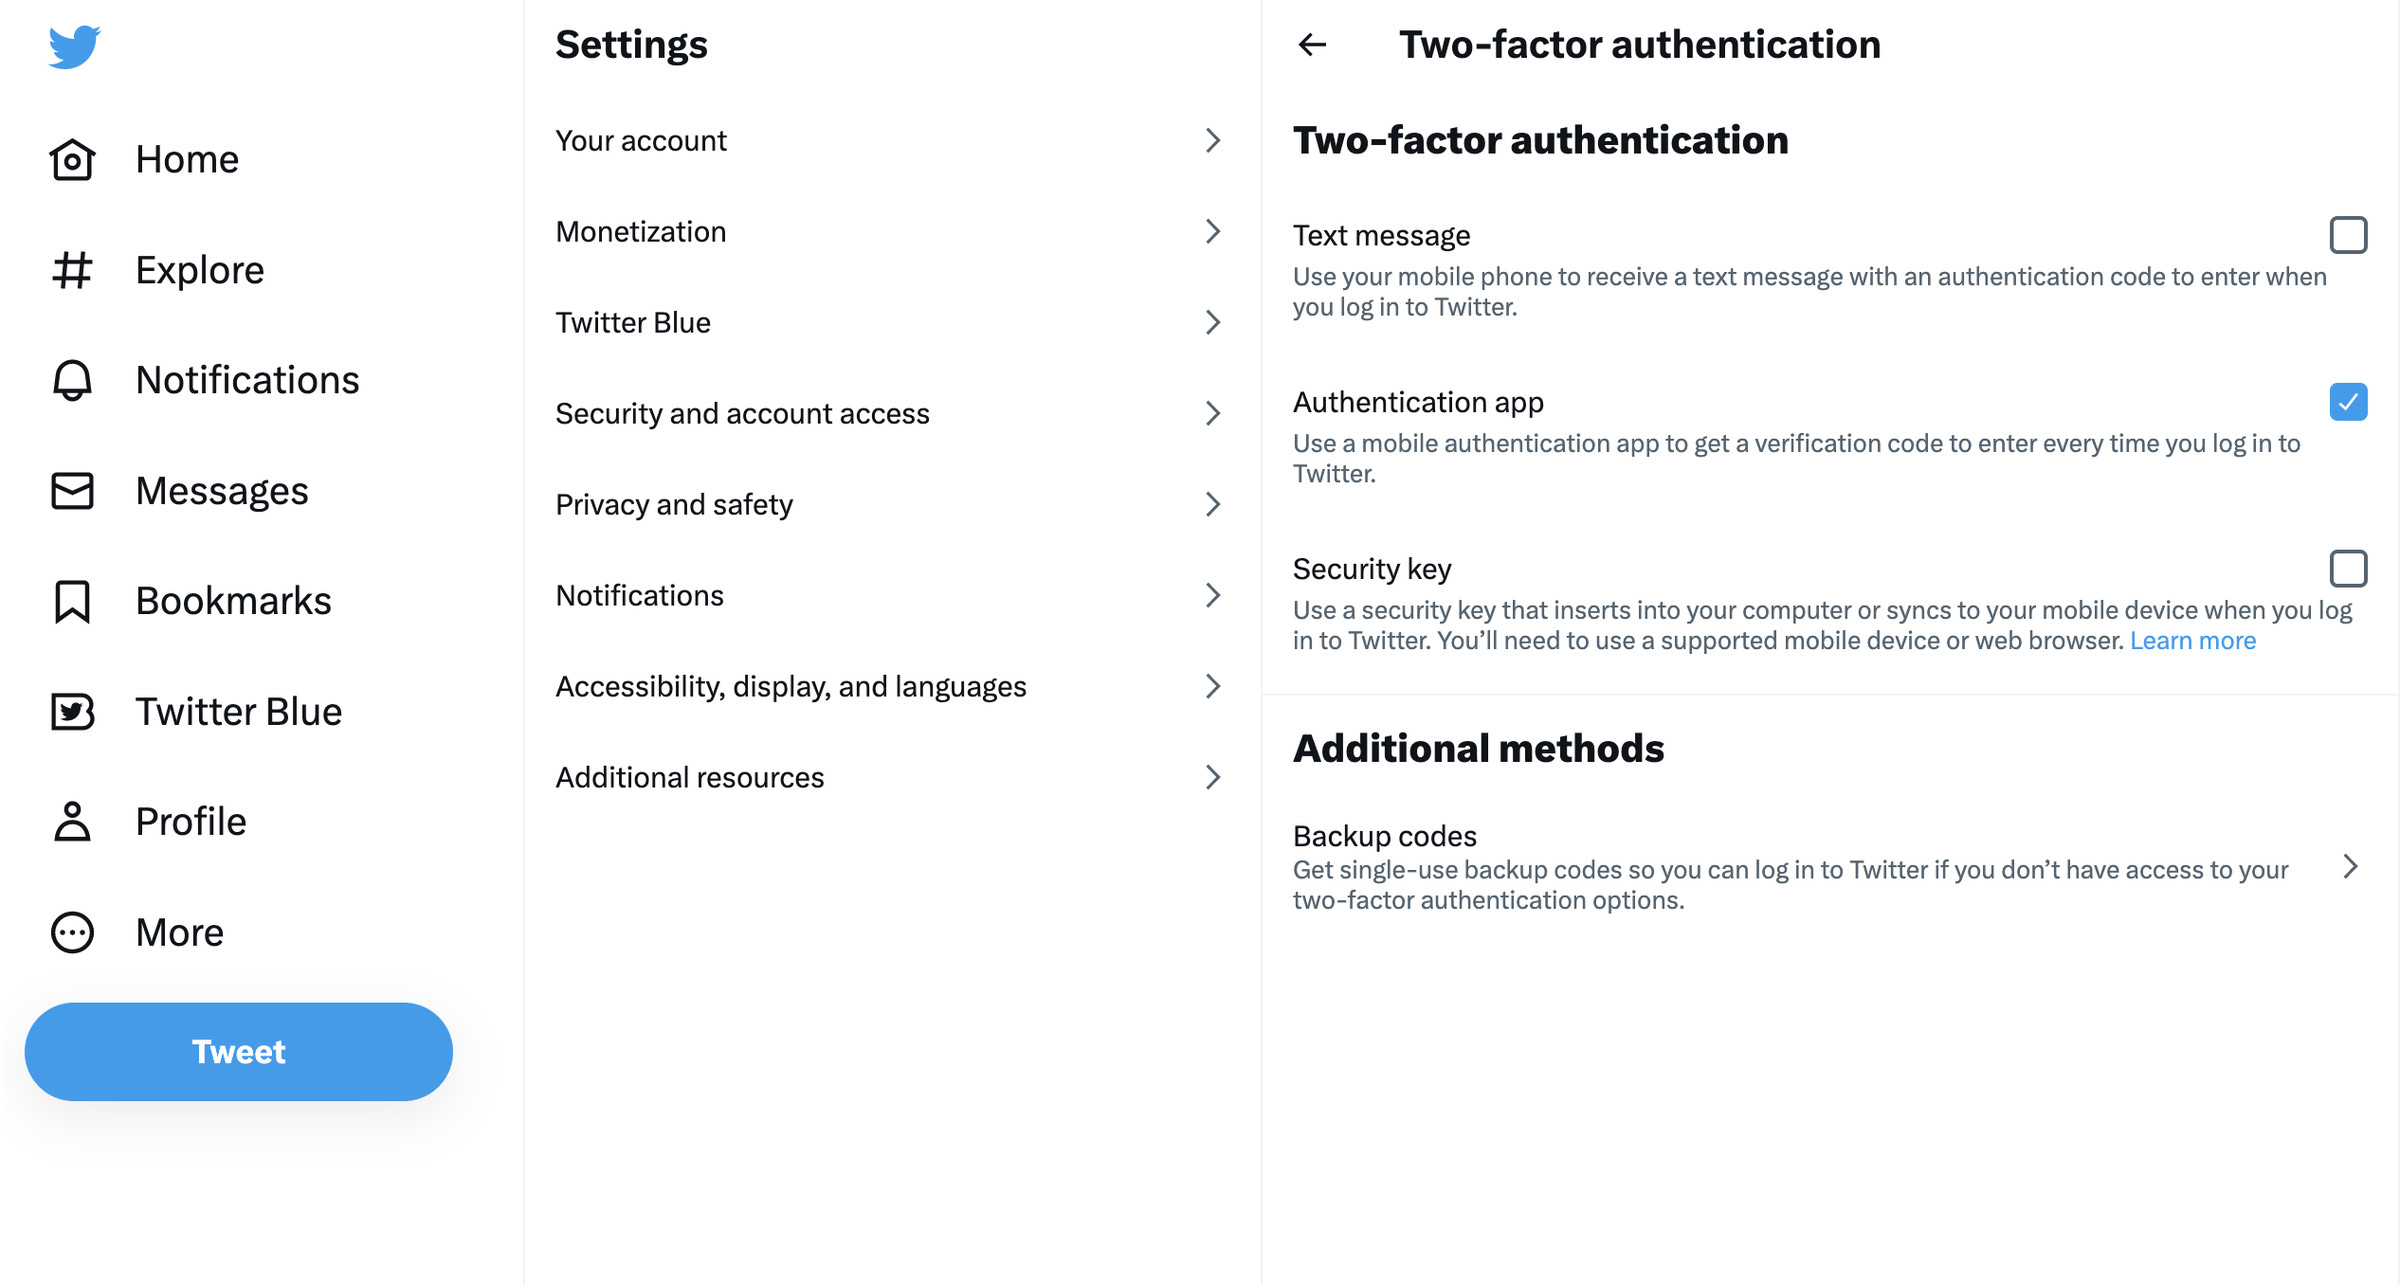 Twitter page with main menu at left, settings menu in the center, and two-factor authentication menu at right.